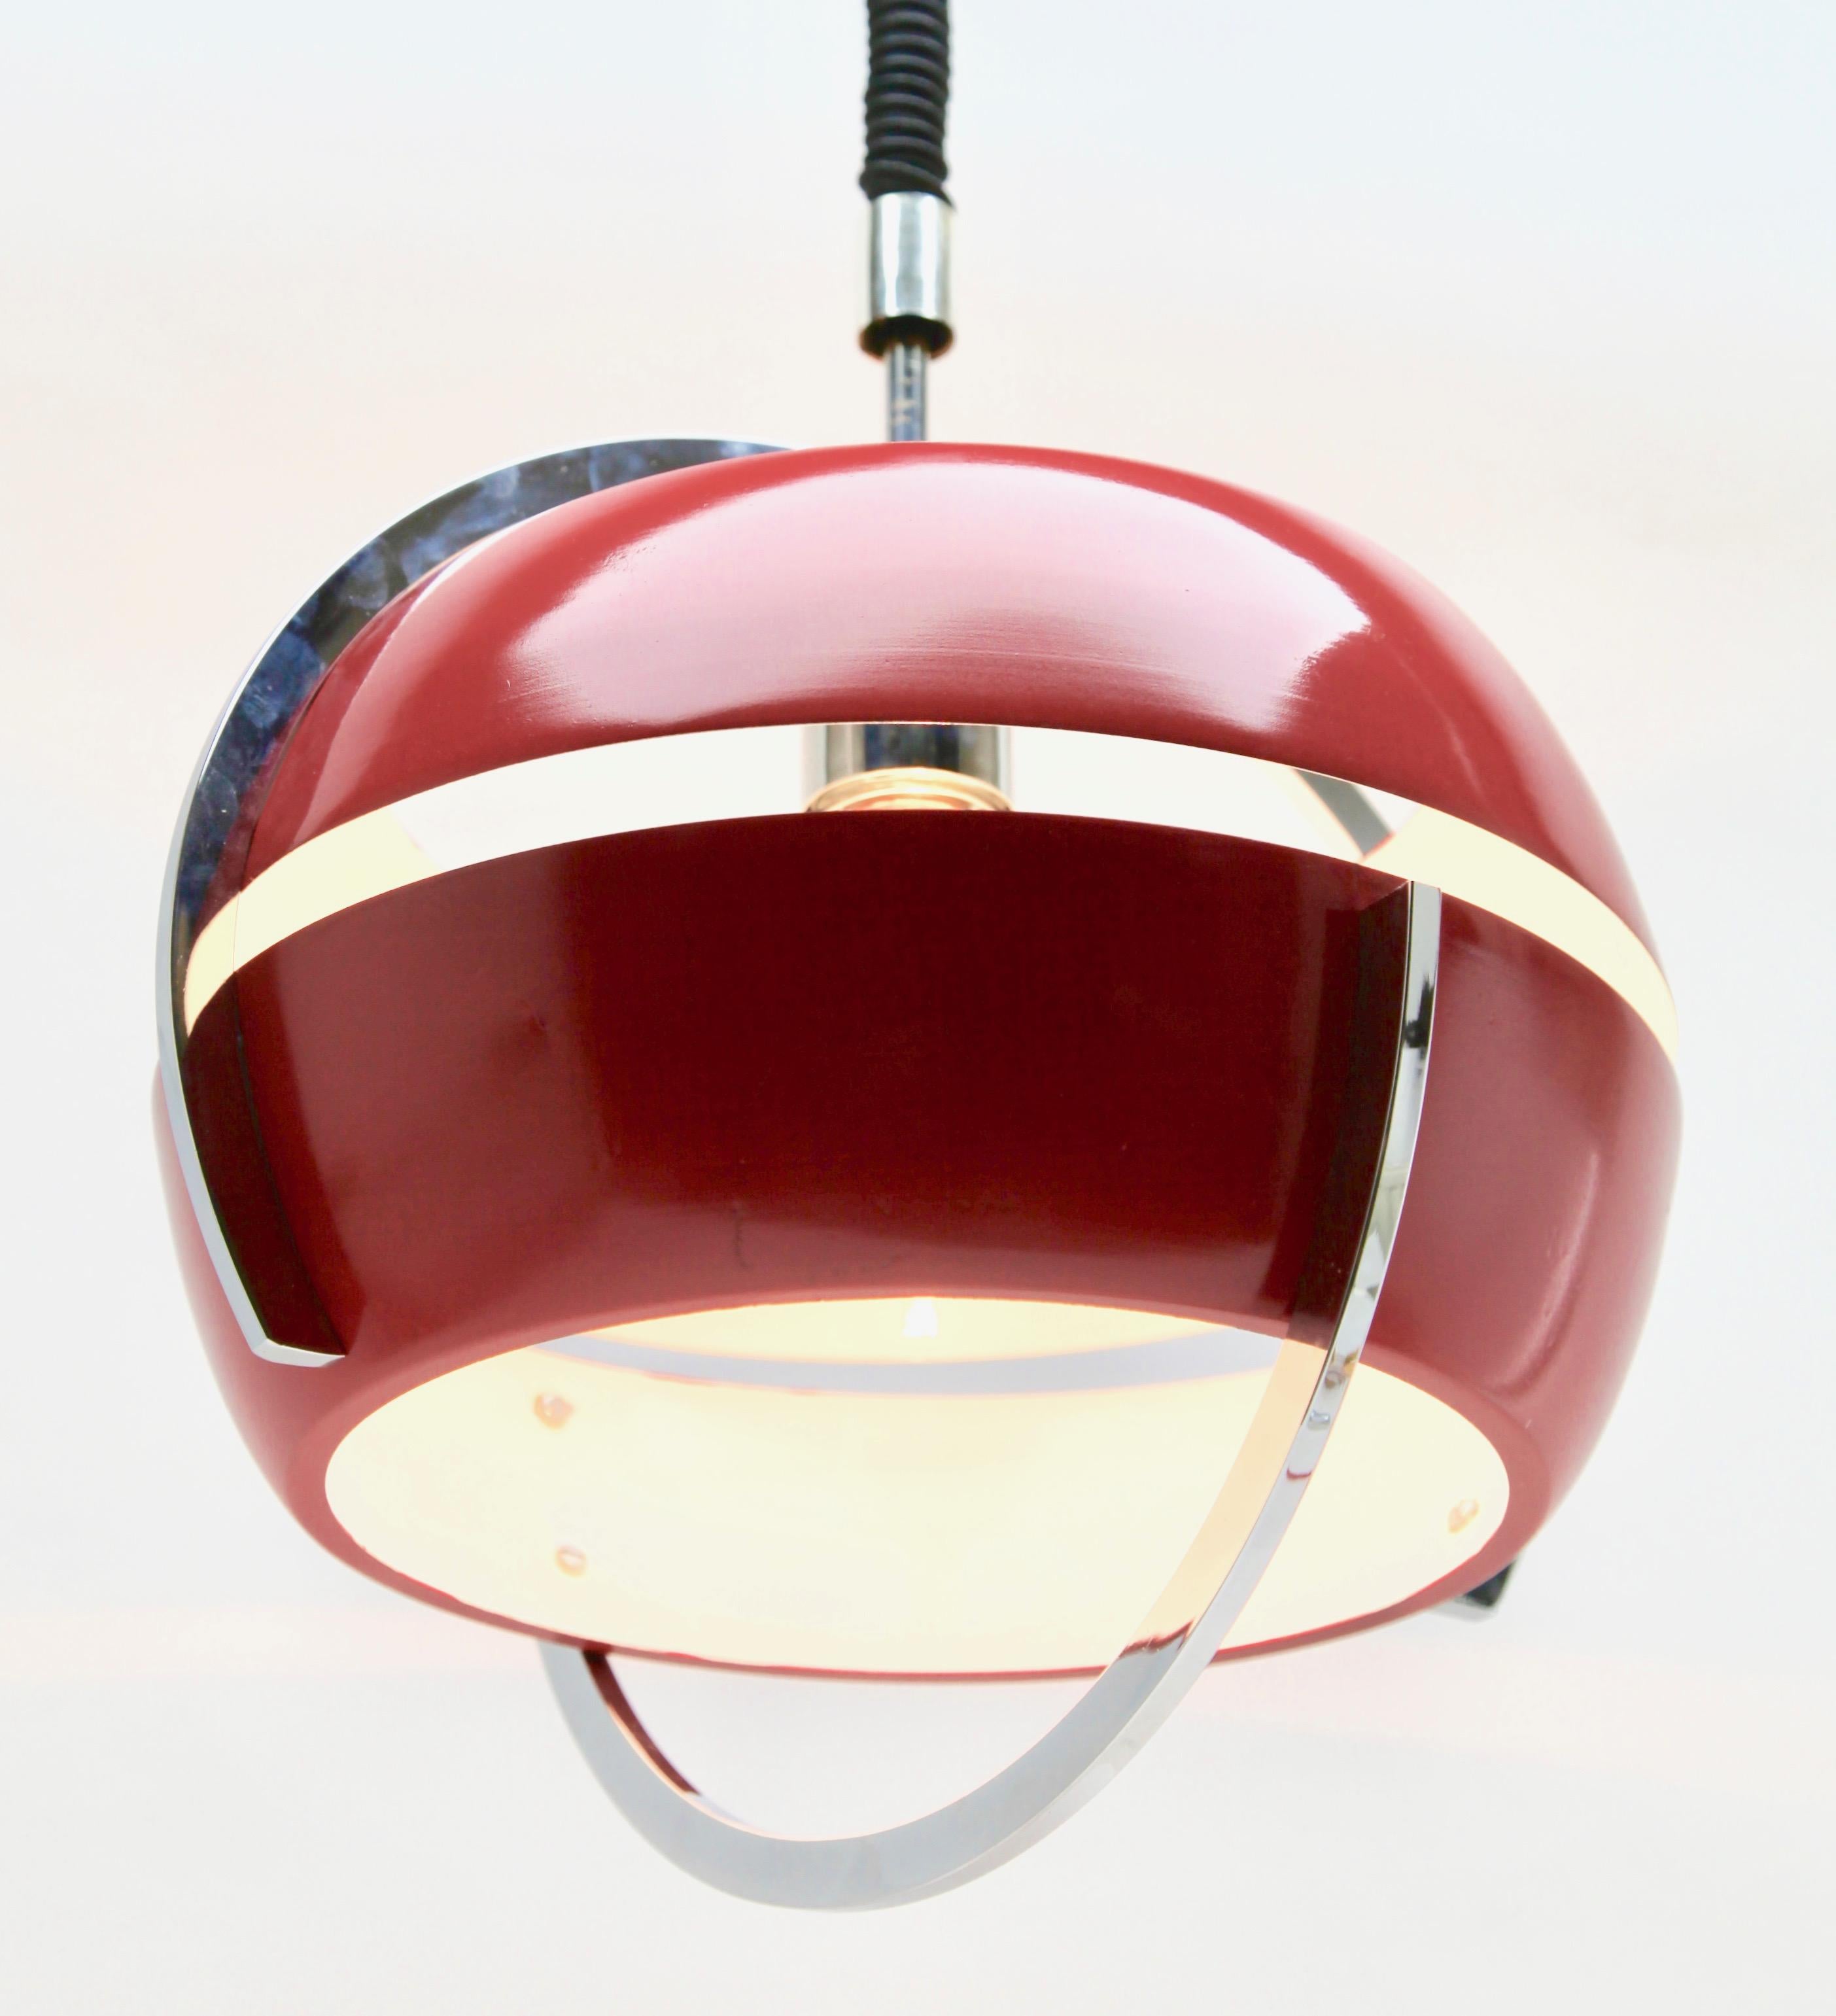 This original, period midcentury lamp was designed by Jan Hoogervorst for the Dutch company Anvia. Originally available in a range of bright colors, it makes a strong statement as a central lighting feature.
Like many midcentury lights for the